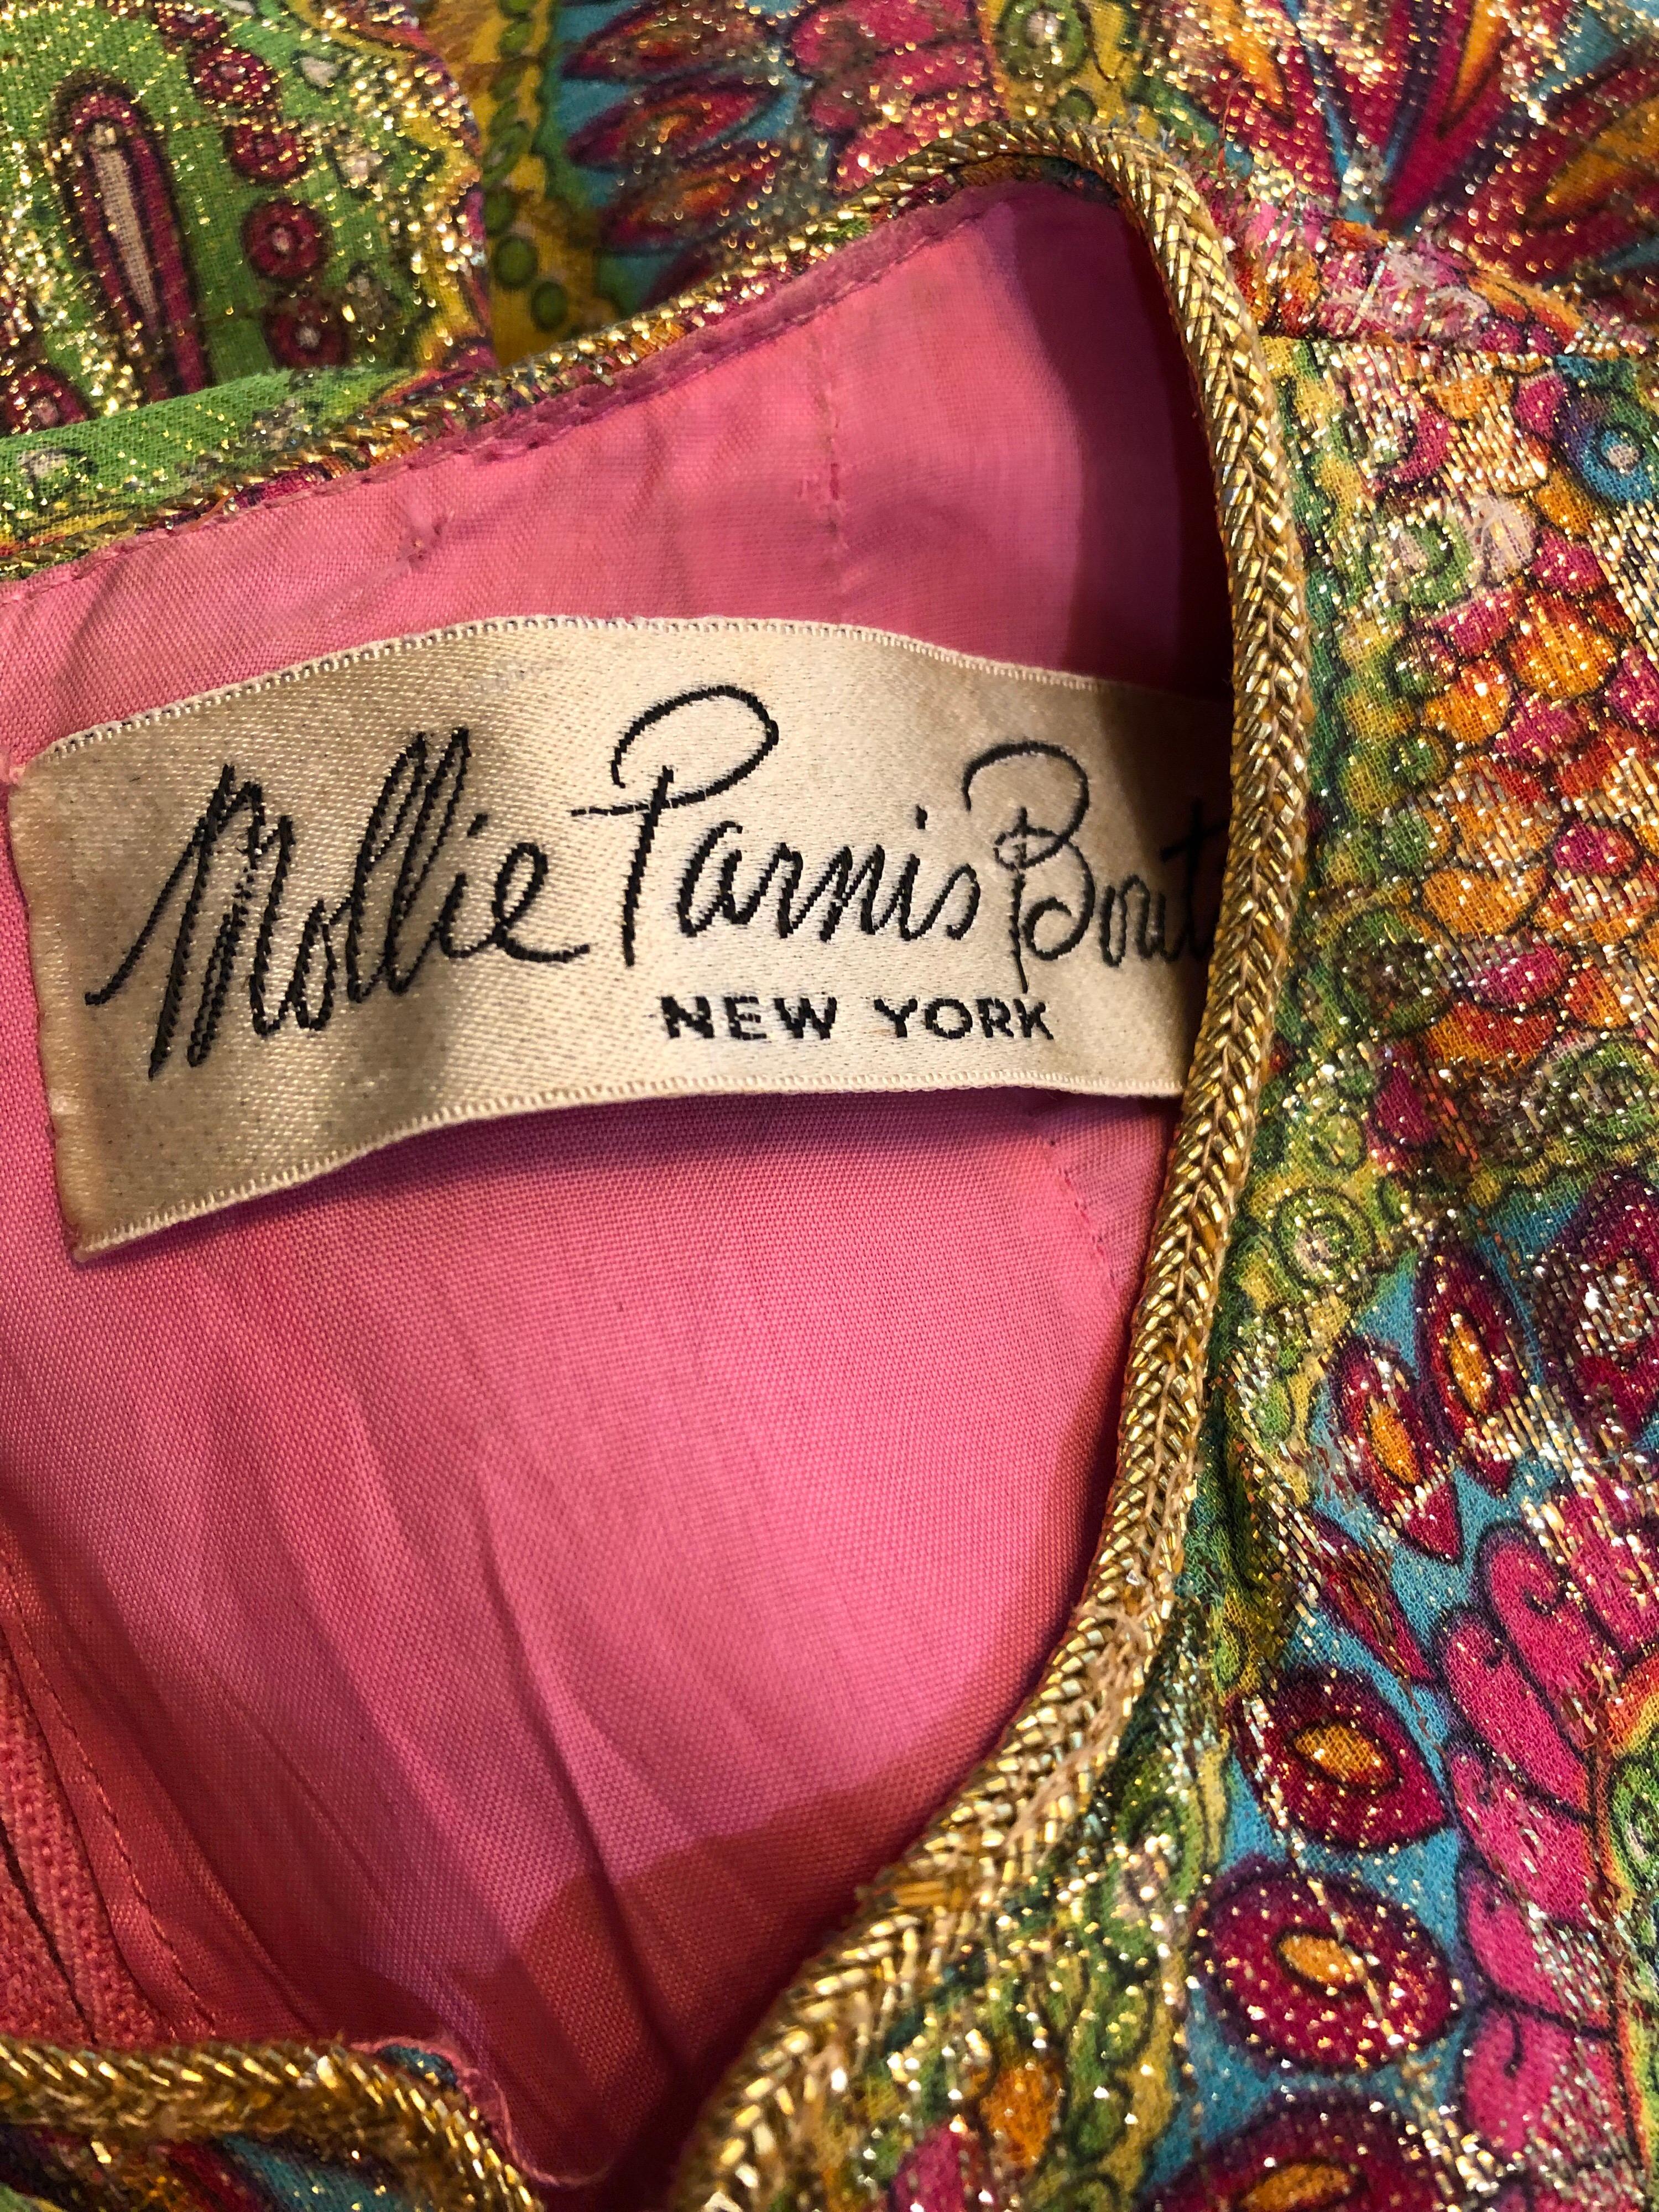 Beautiful 1960s MOLLIE PARNIS metallic silk bright color paisley print dress! Features vibrant colors of hot pink, turquoise blue, green, yellow and orange. Gold metallic threading throughout. Renaissance style with laces up the bodice. Grommets